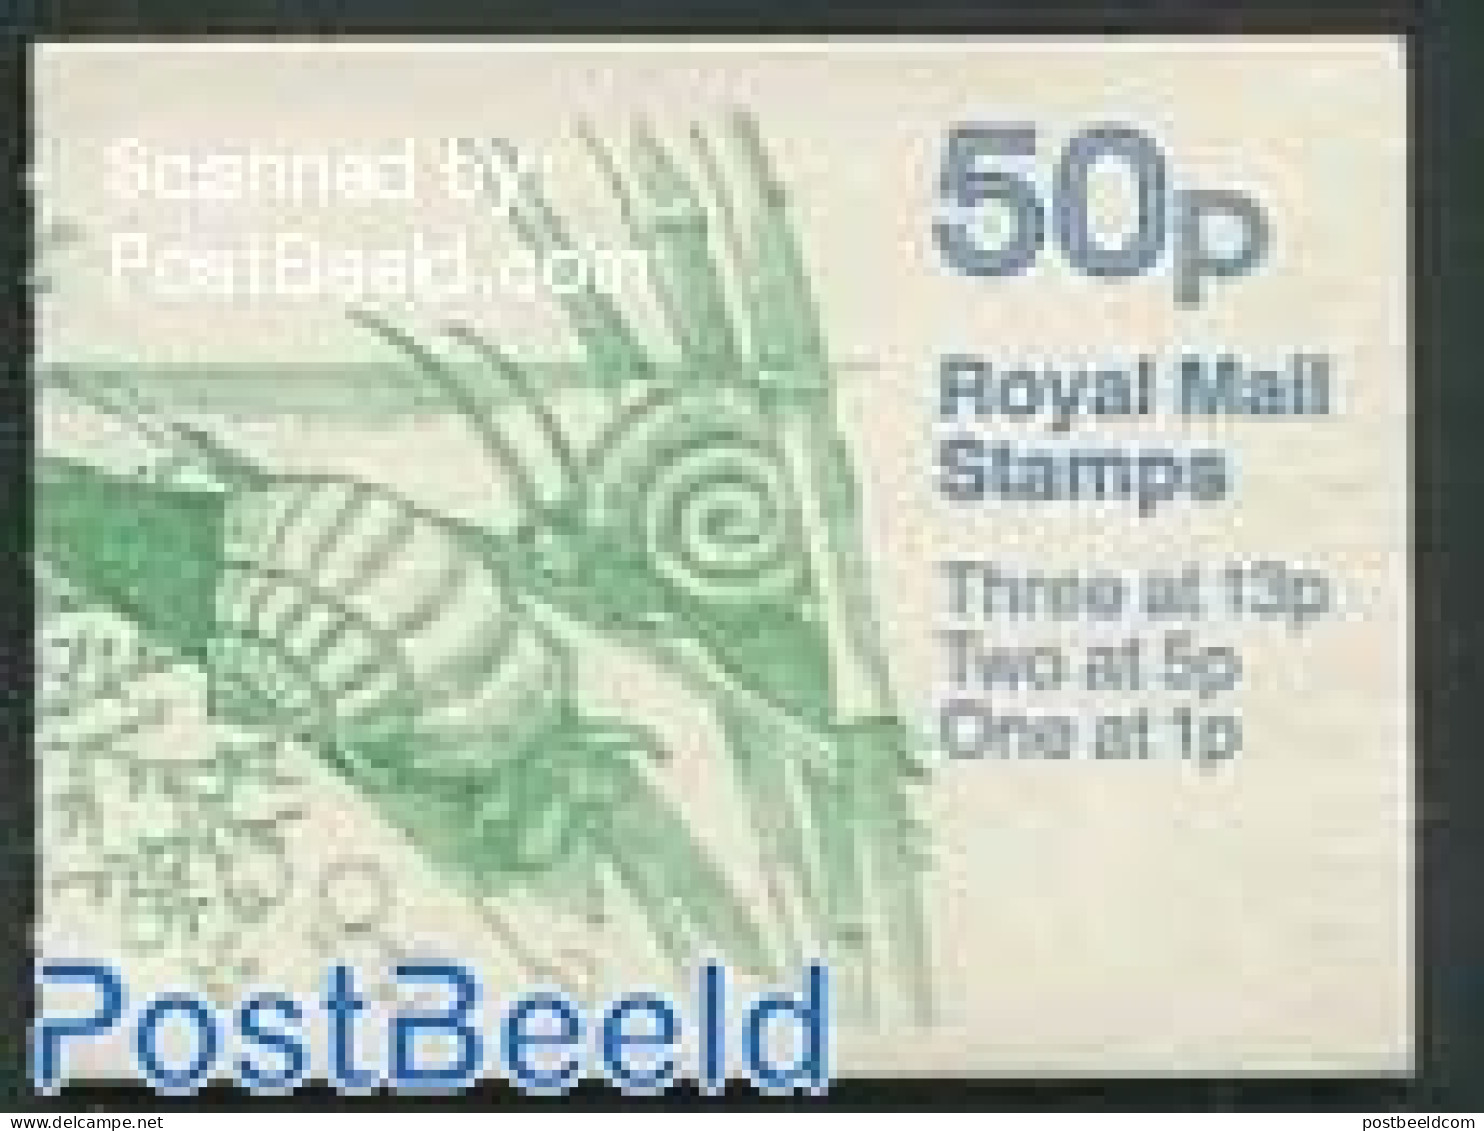 Great Britain 1987 Def. Booklet, Giant Pond And Great Ramshorn Snails, Mint NH, Nature - Shells & Crustaceans - Stamp .. - Ongebruikt